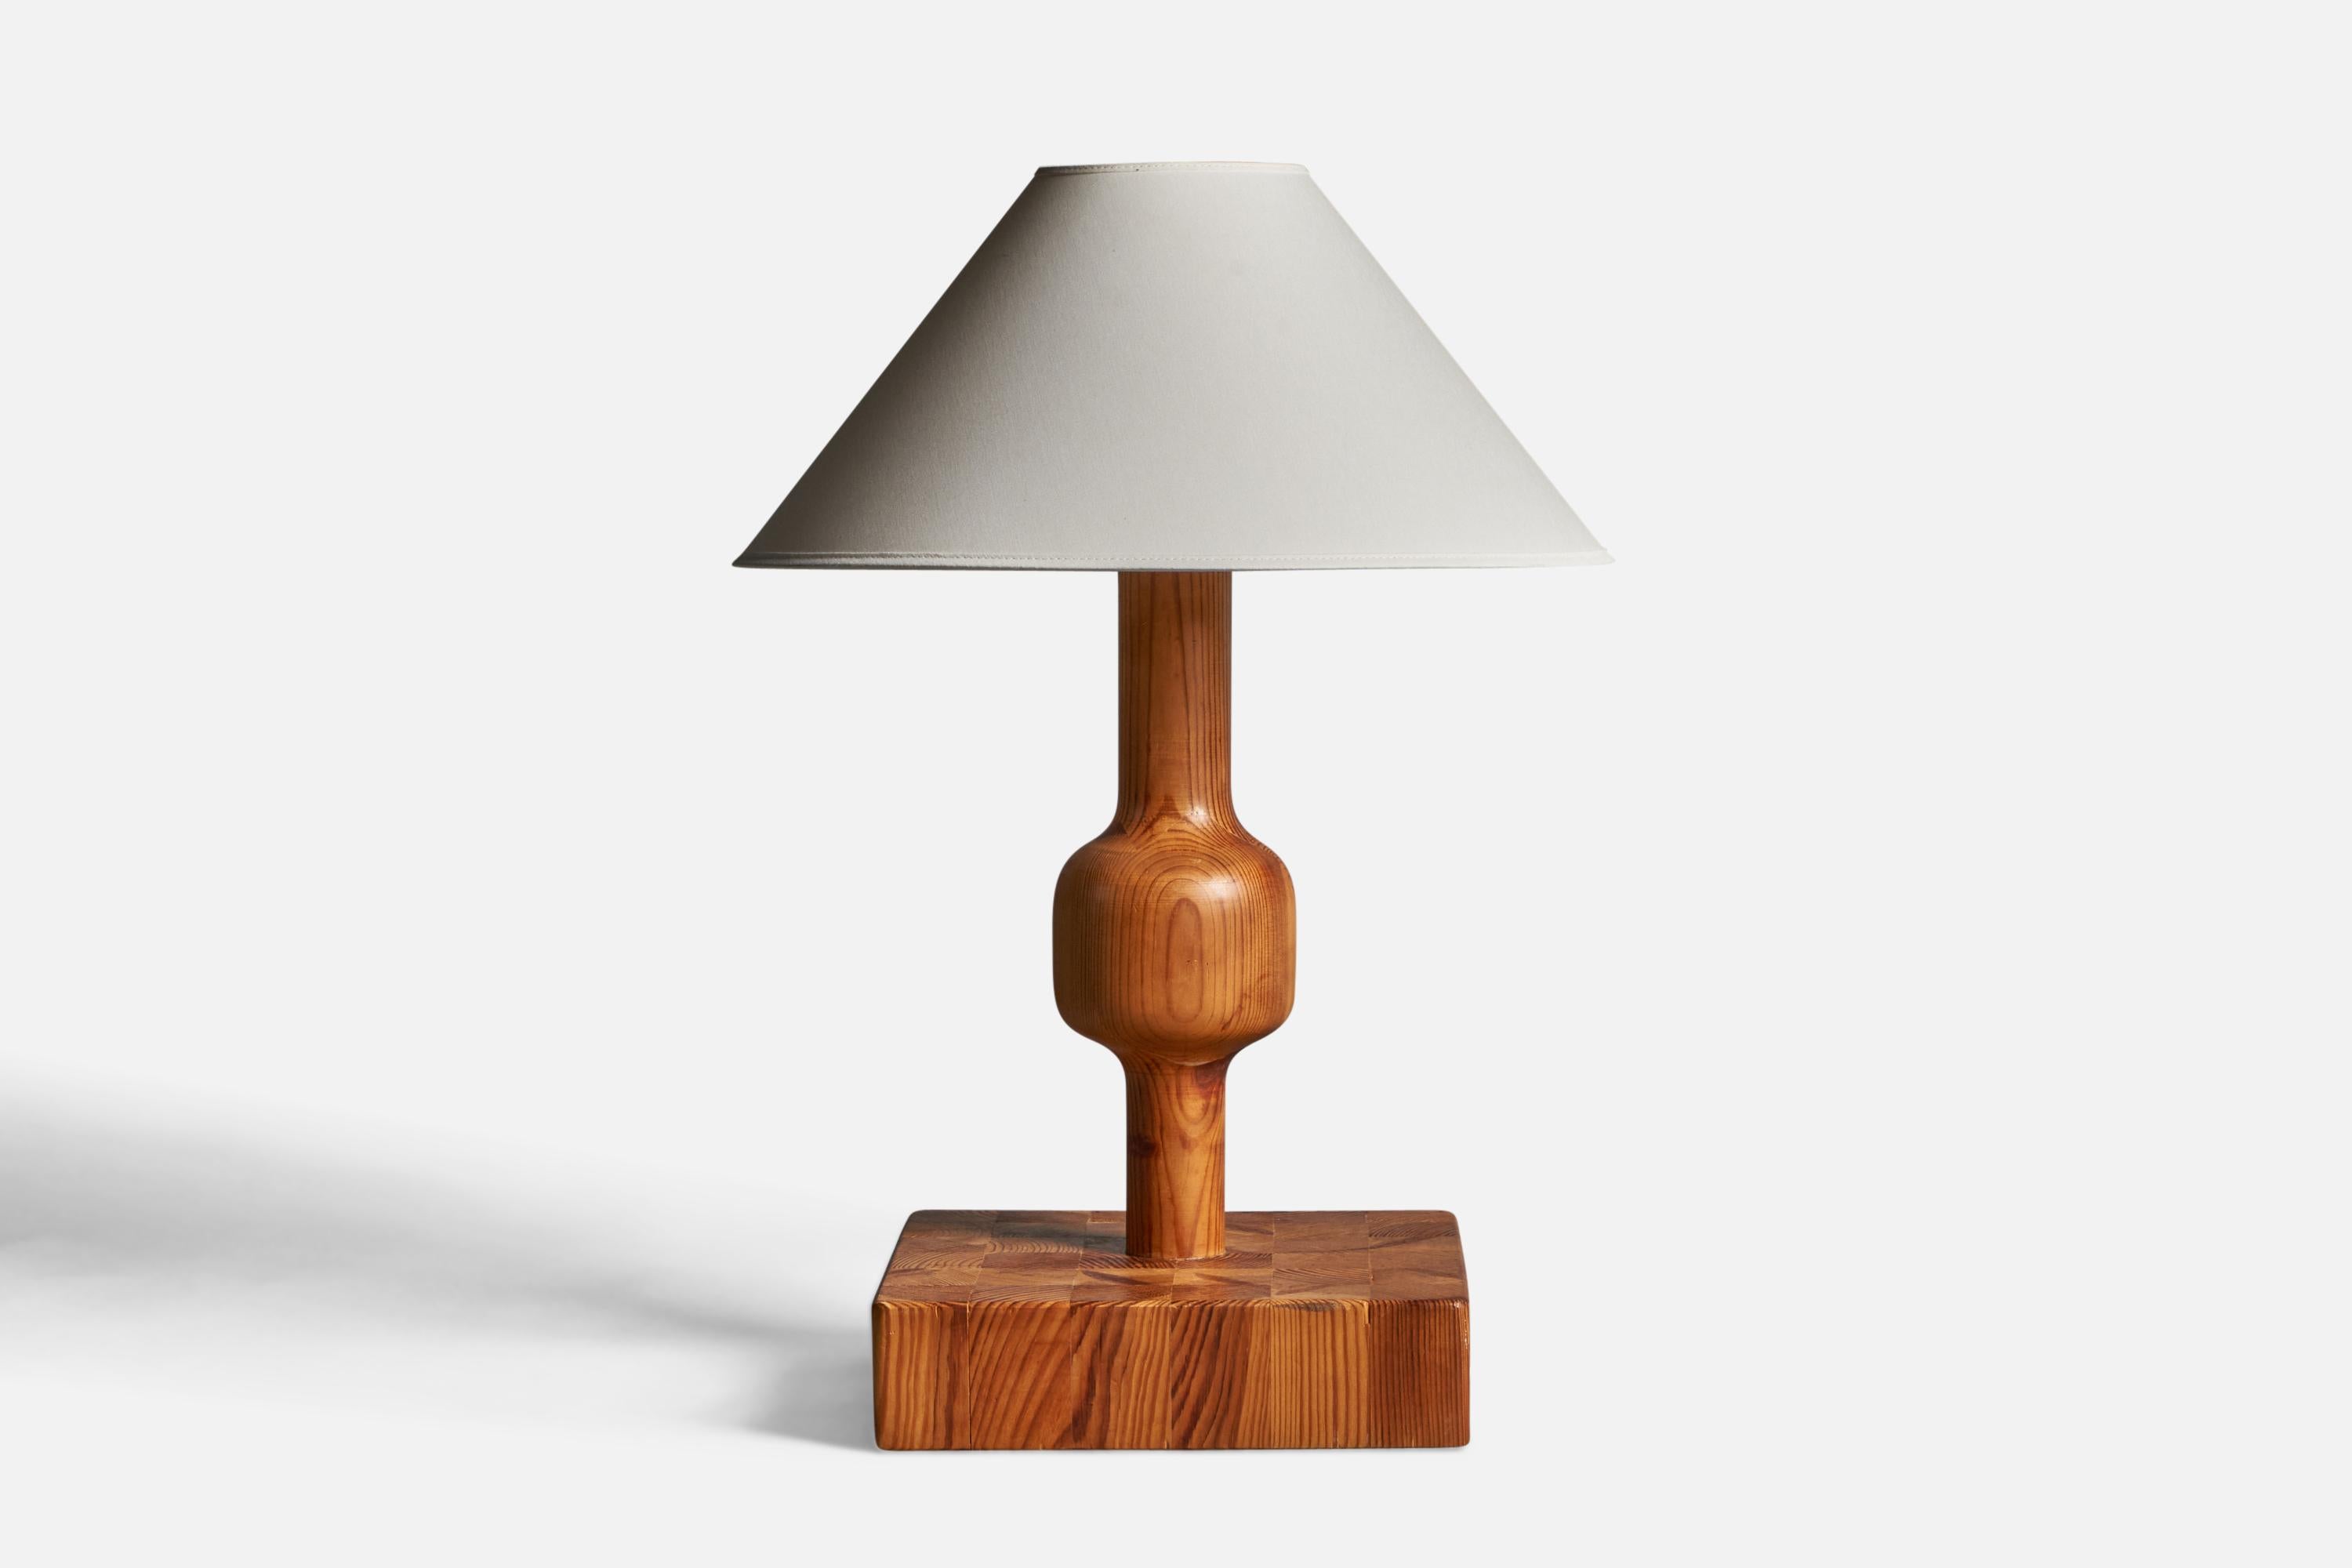 A sizeable pine table lamp, designed and produced in Sweden, c. 1970s.

Dimensions of Lamp (inches): 17.5